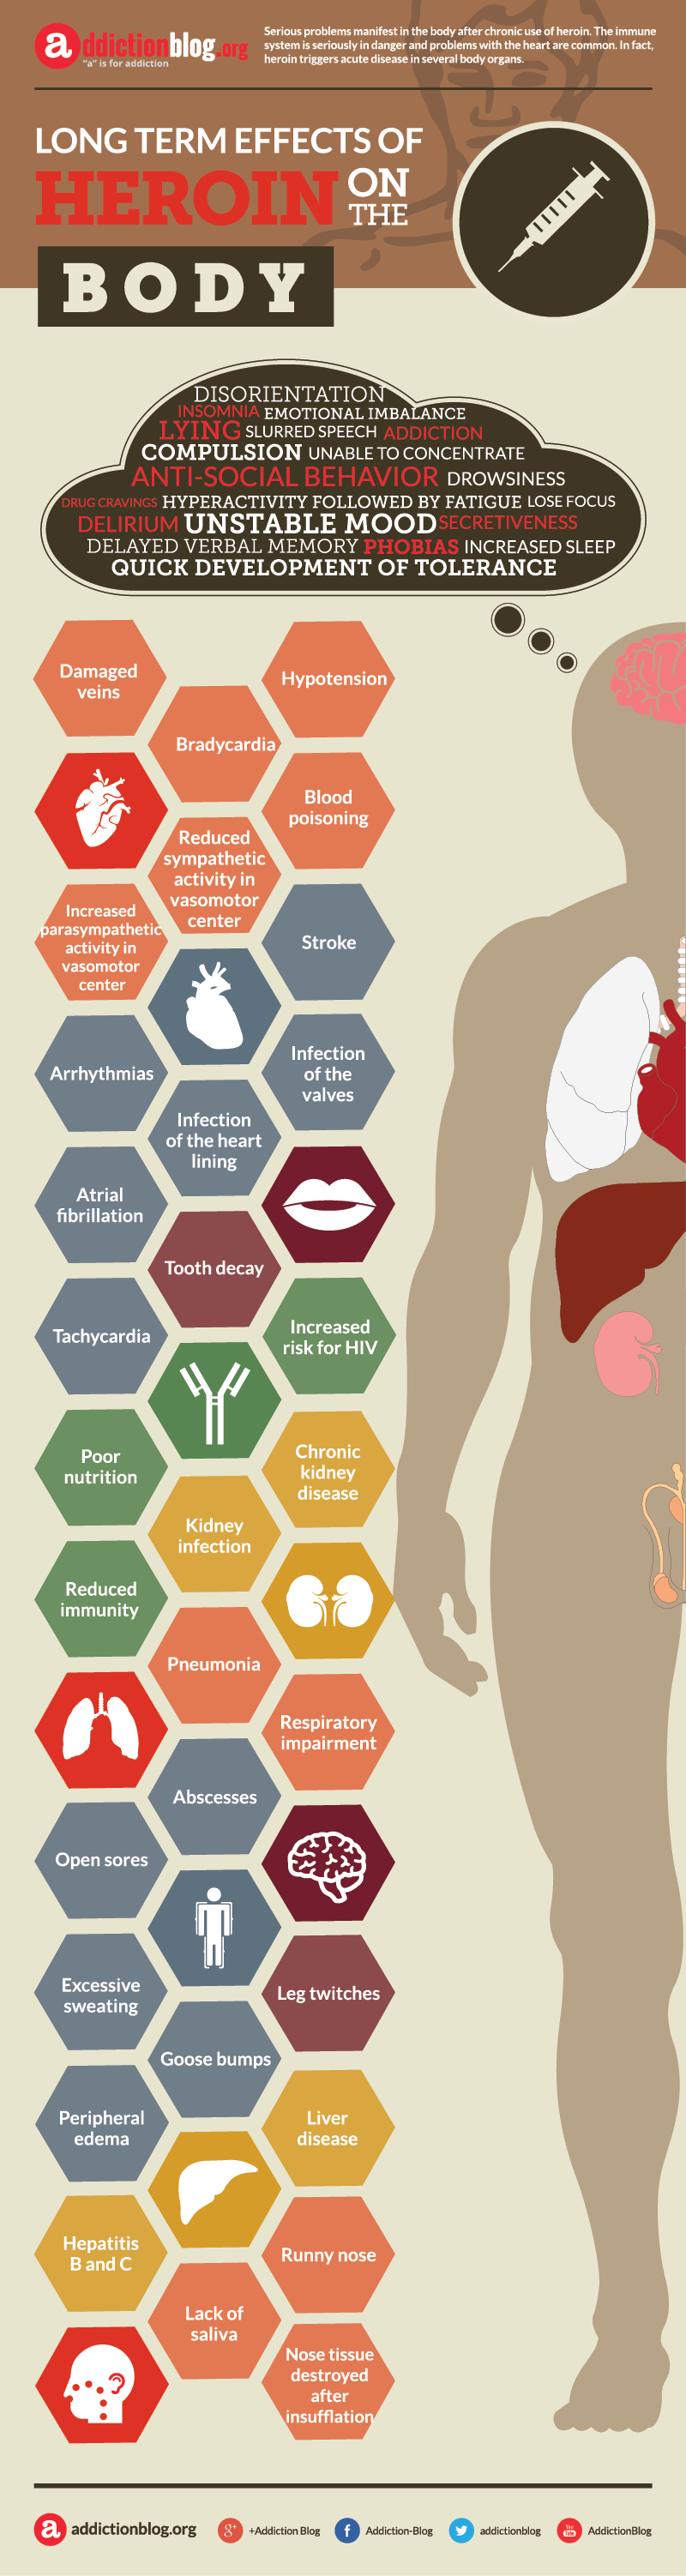 Long term effects of heroin on the body (INFOGRAPHIC)